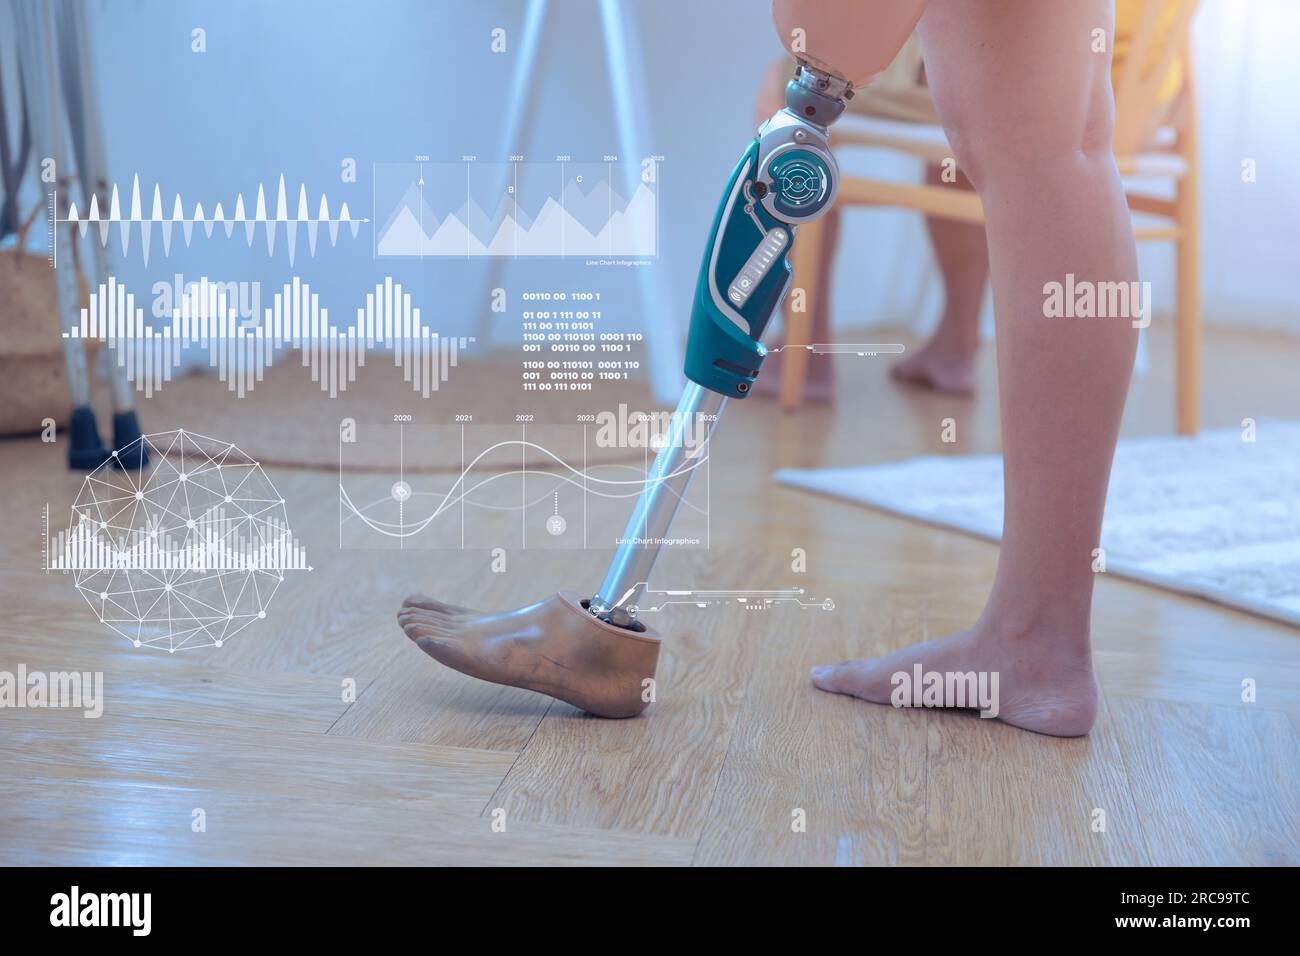 modern technology in prosthetic leg for disability people. robotic artificial knee joint bionic limb with data sensor overlay graphic Stock Photo